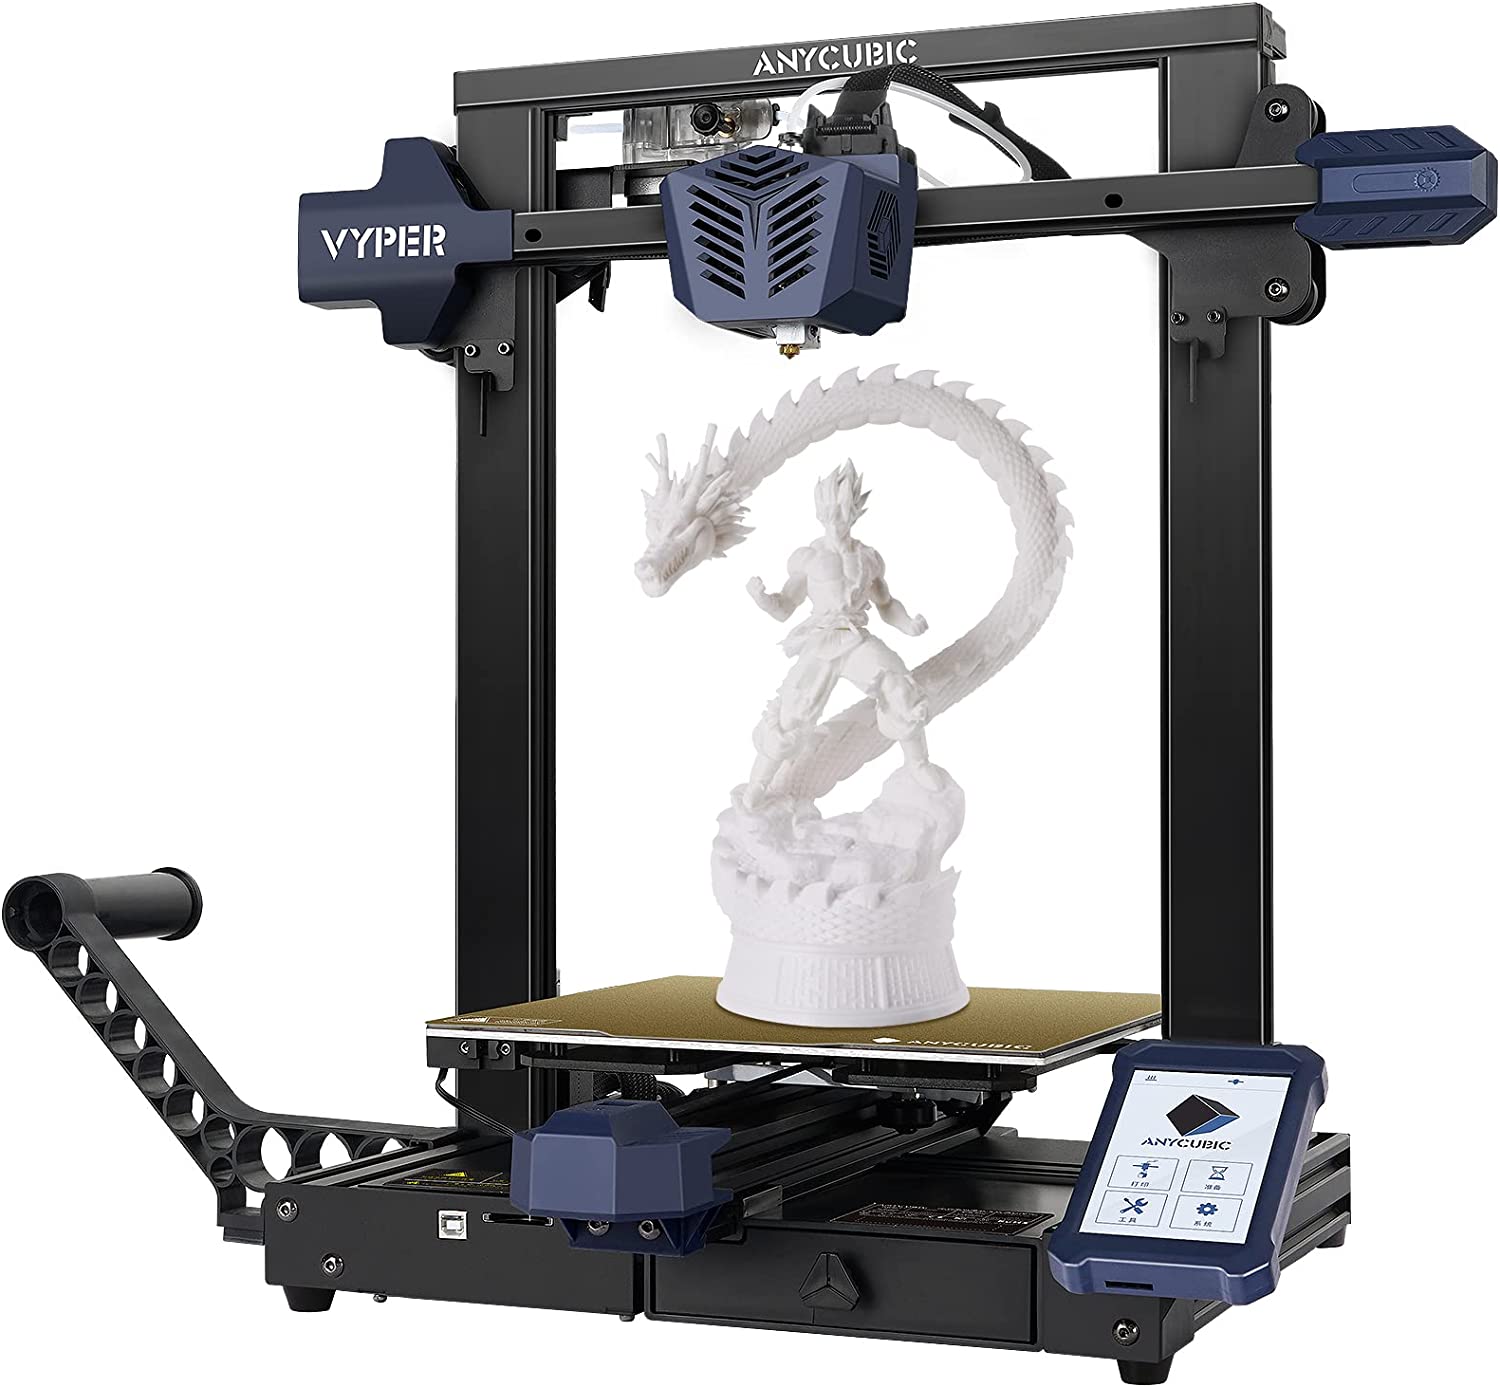 ANYCUBIC Vyper Imprimante 3D Taille d'impression 245 x 245 x 260 mm